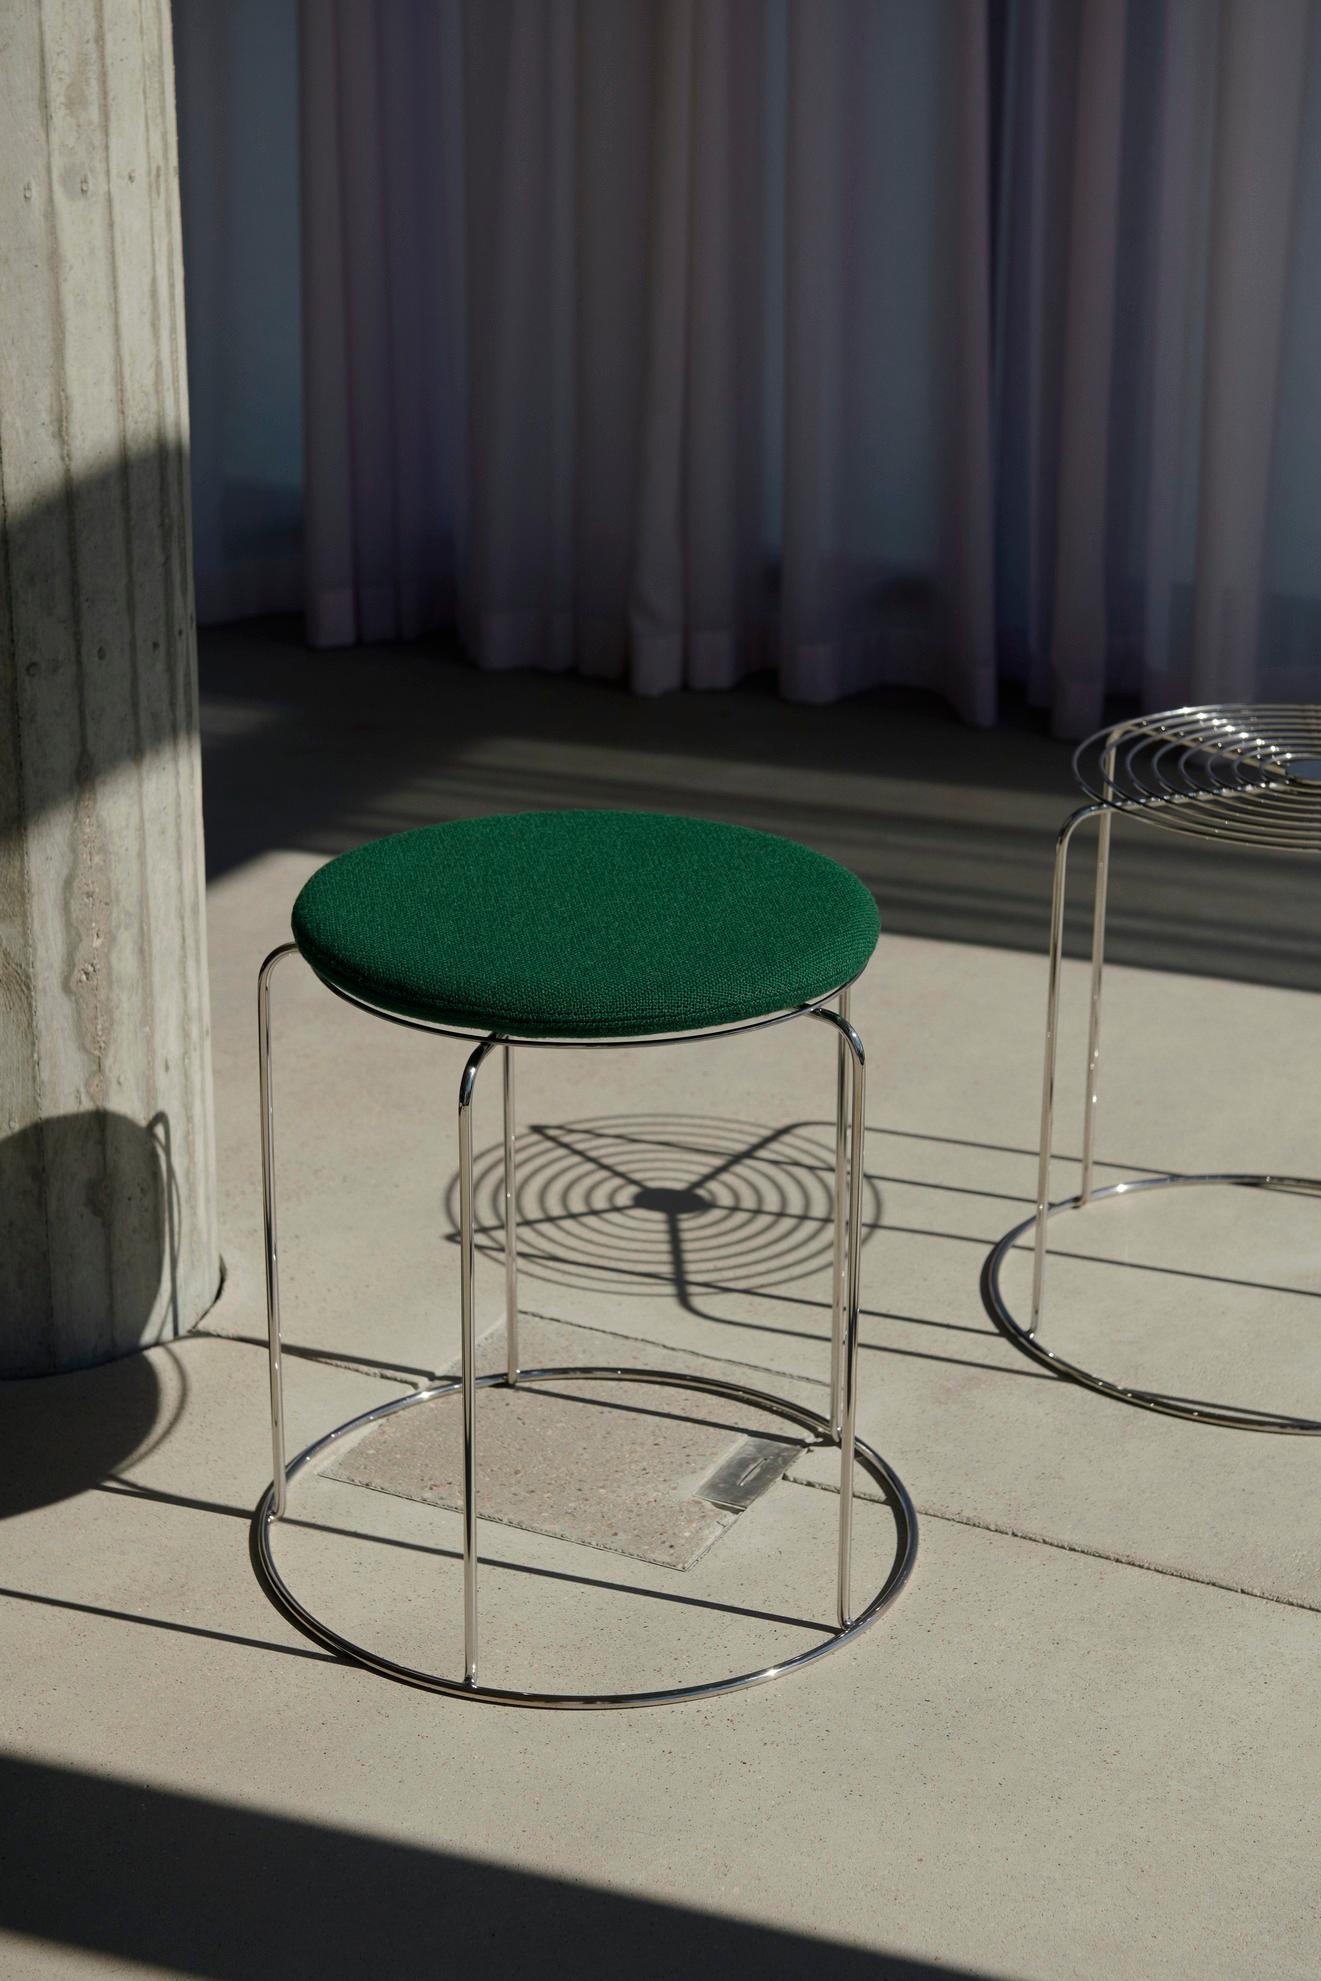 What makes the Wire Stool indicatively Verner Panton is the use of stainless-steel wire to create a simple geometric shape with repeated patterns, in a stackable stool that doubles as a side table. 
An icon from the archives destined to become a